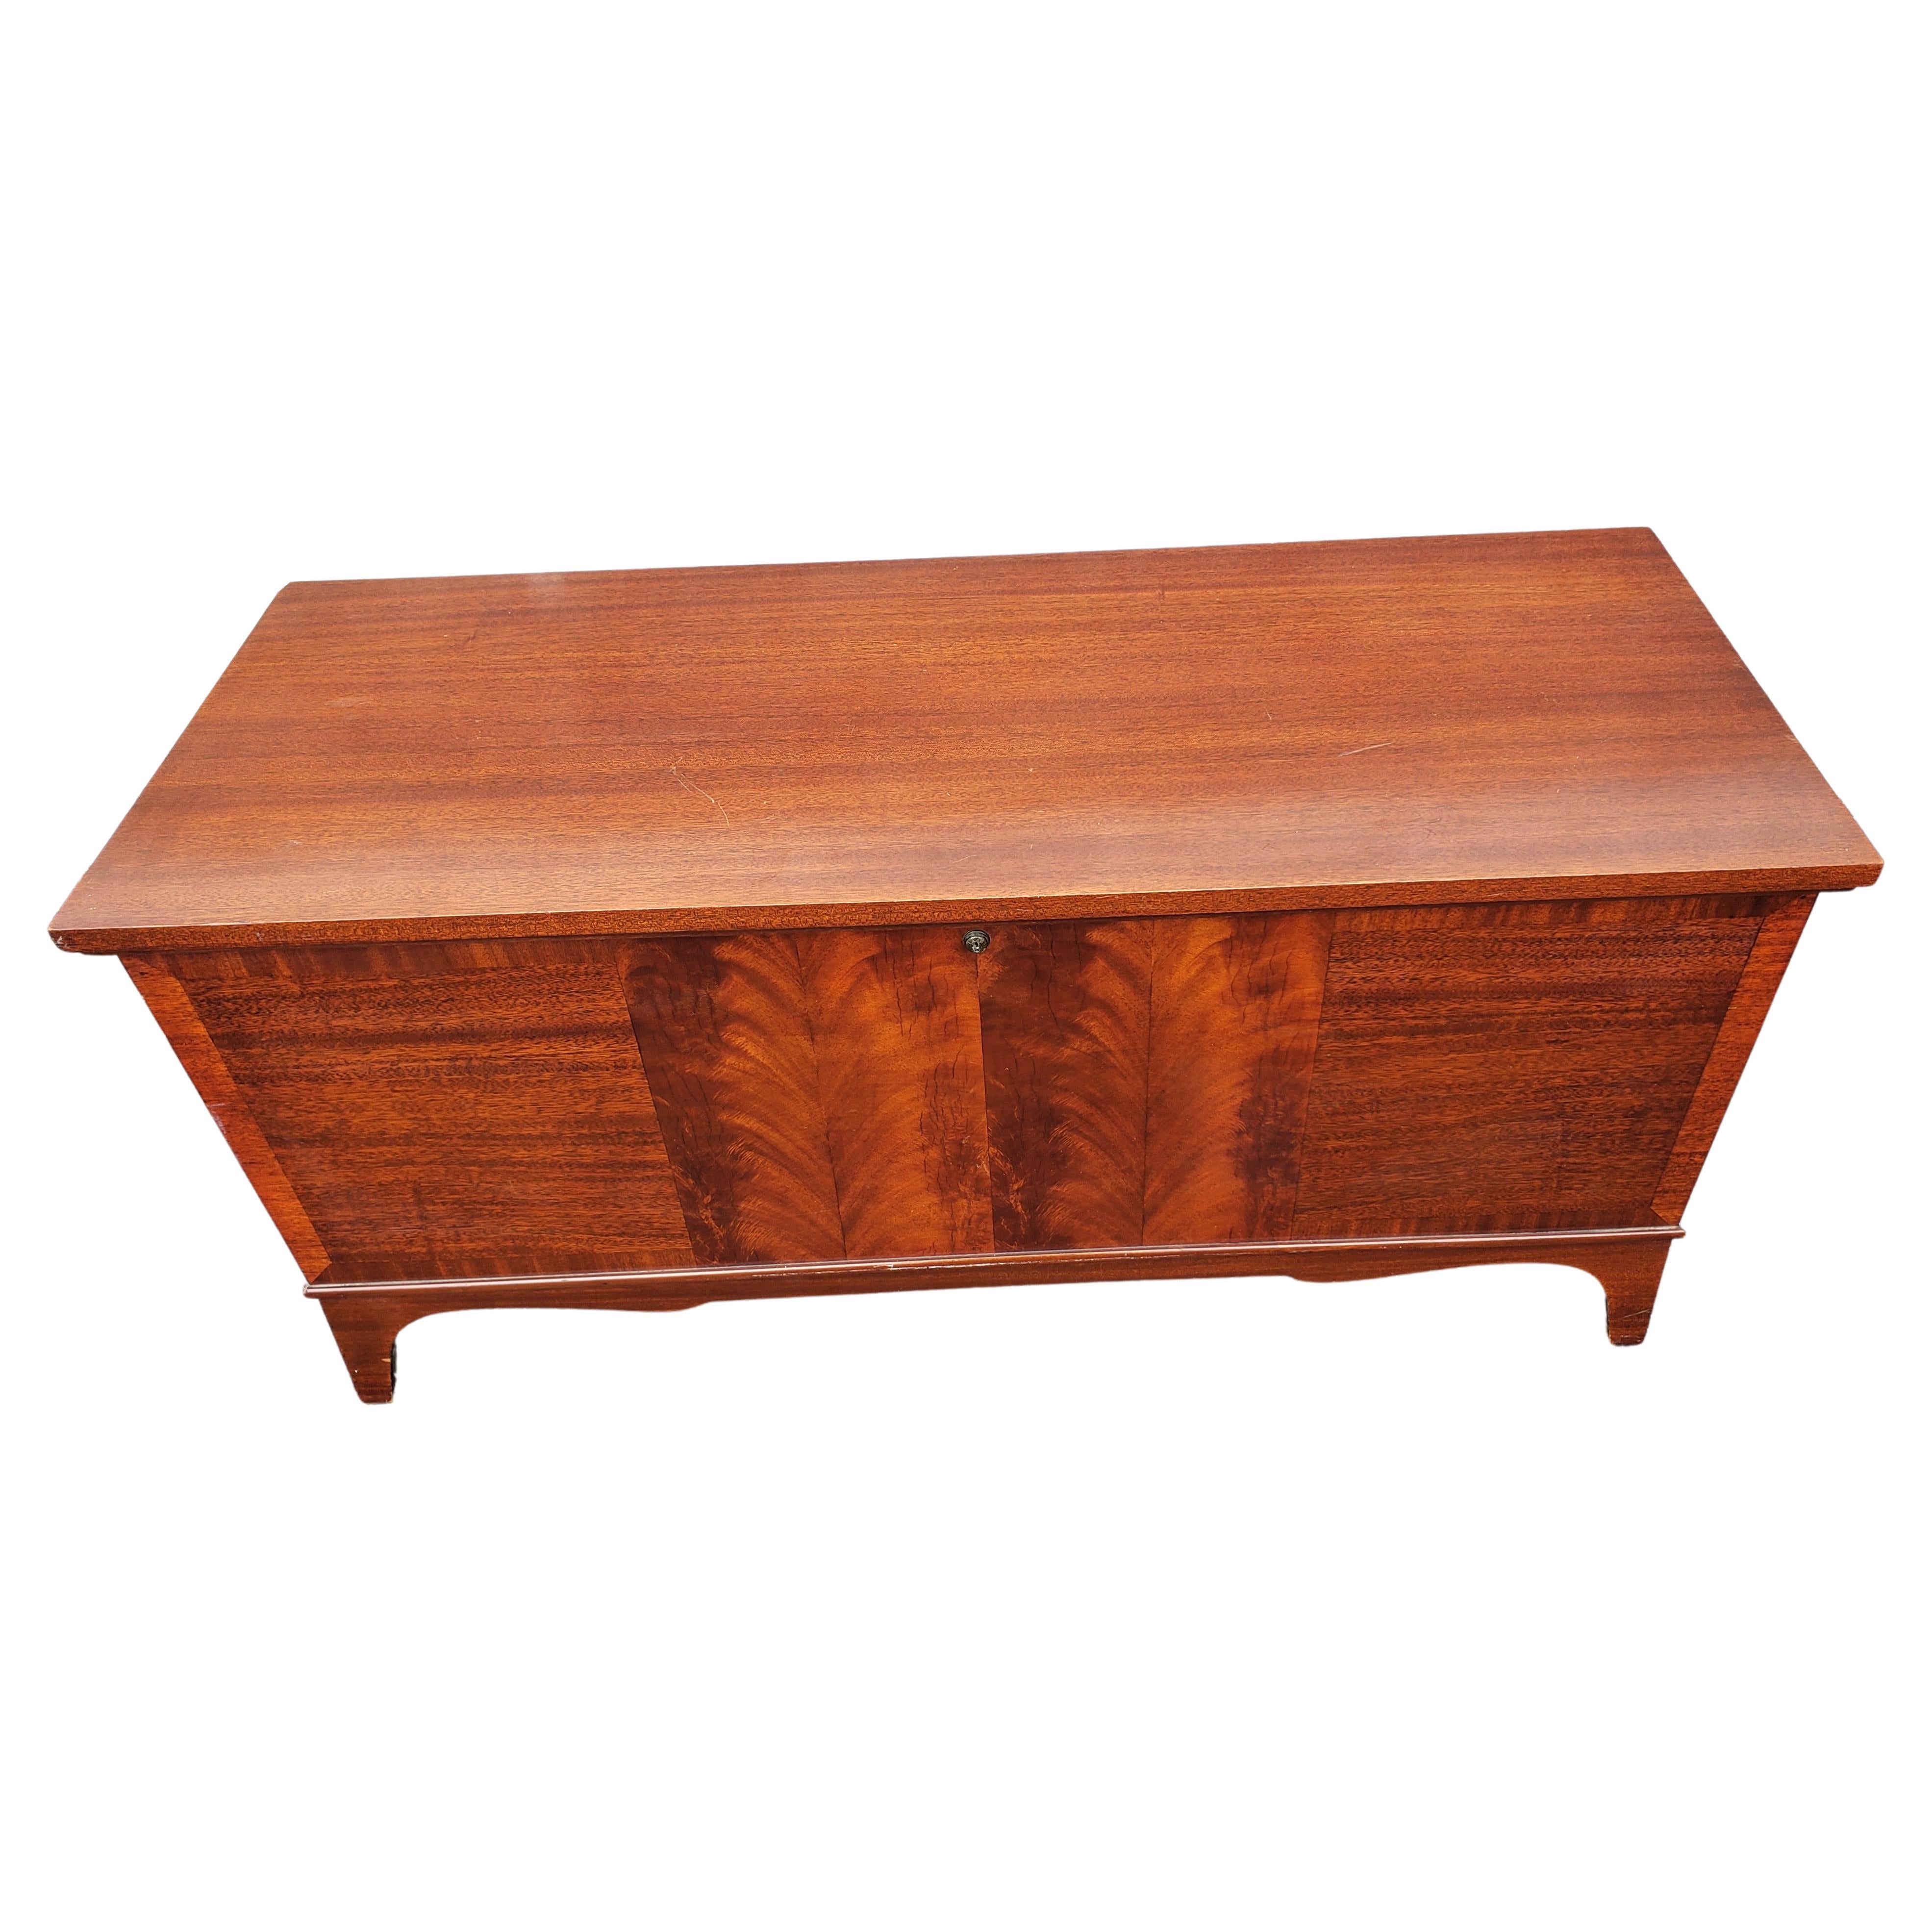 1960s Lane Altavista Banded flame Mahogany Cedar chest. This beautiful vintage modern cedar chest was designed by Lane Furniture. An iconic piece that has a shelf that floats out when the top is lifted. The felt lining in the shelf, banded inlaid